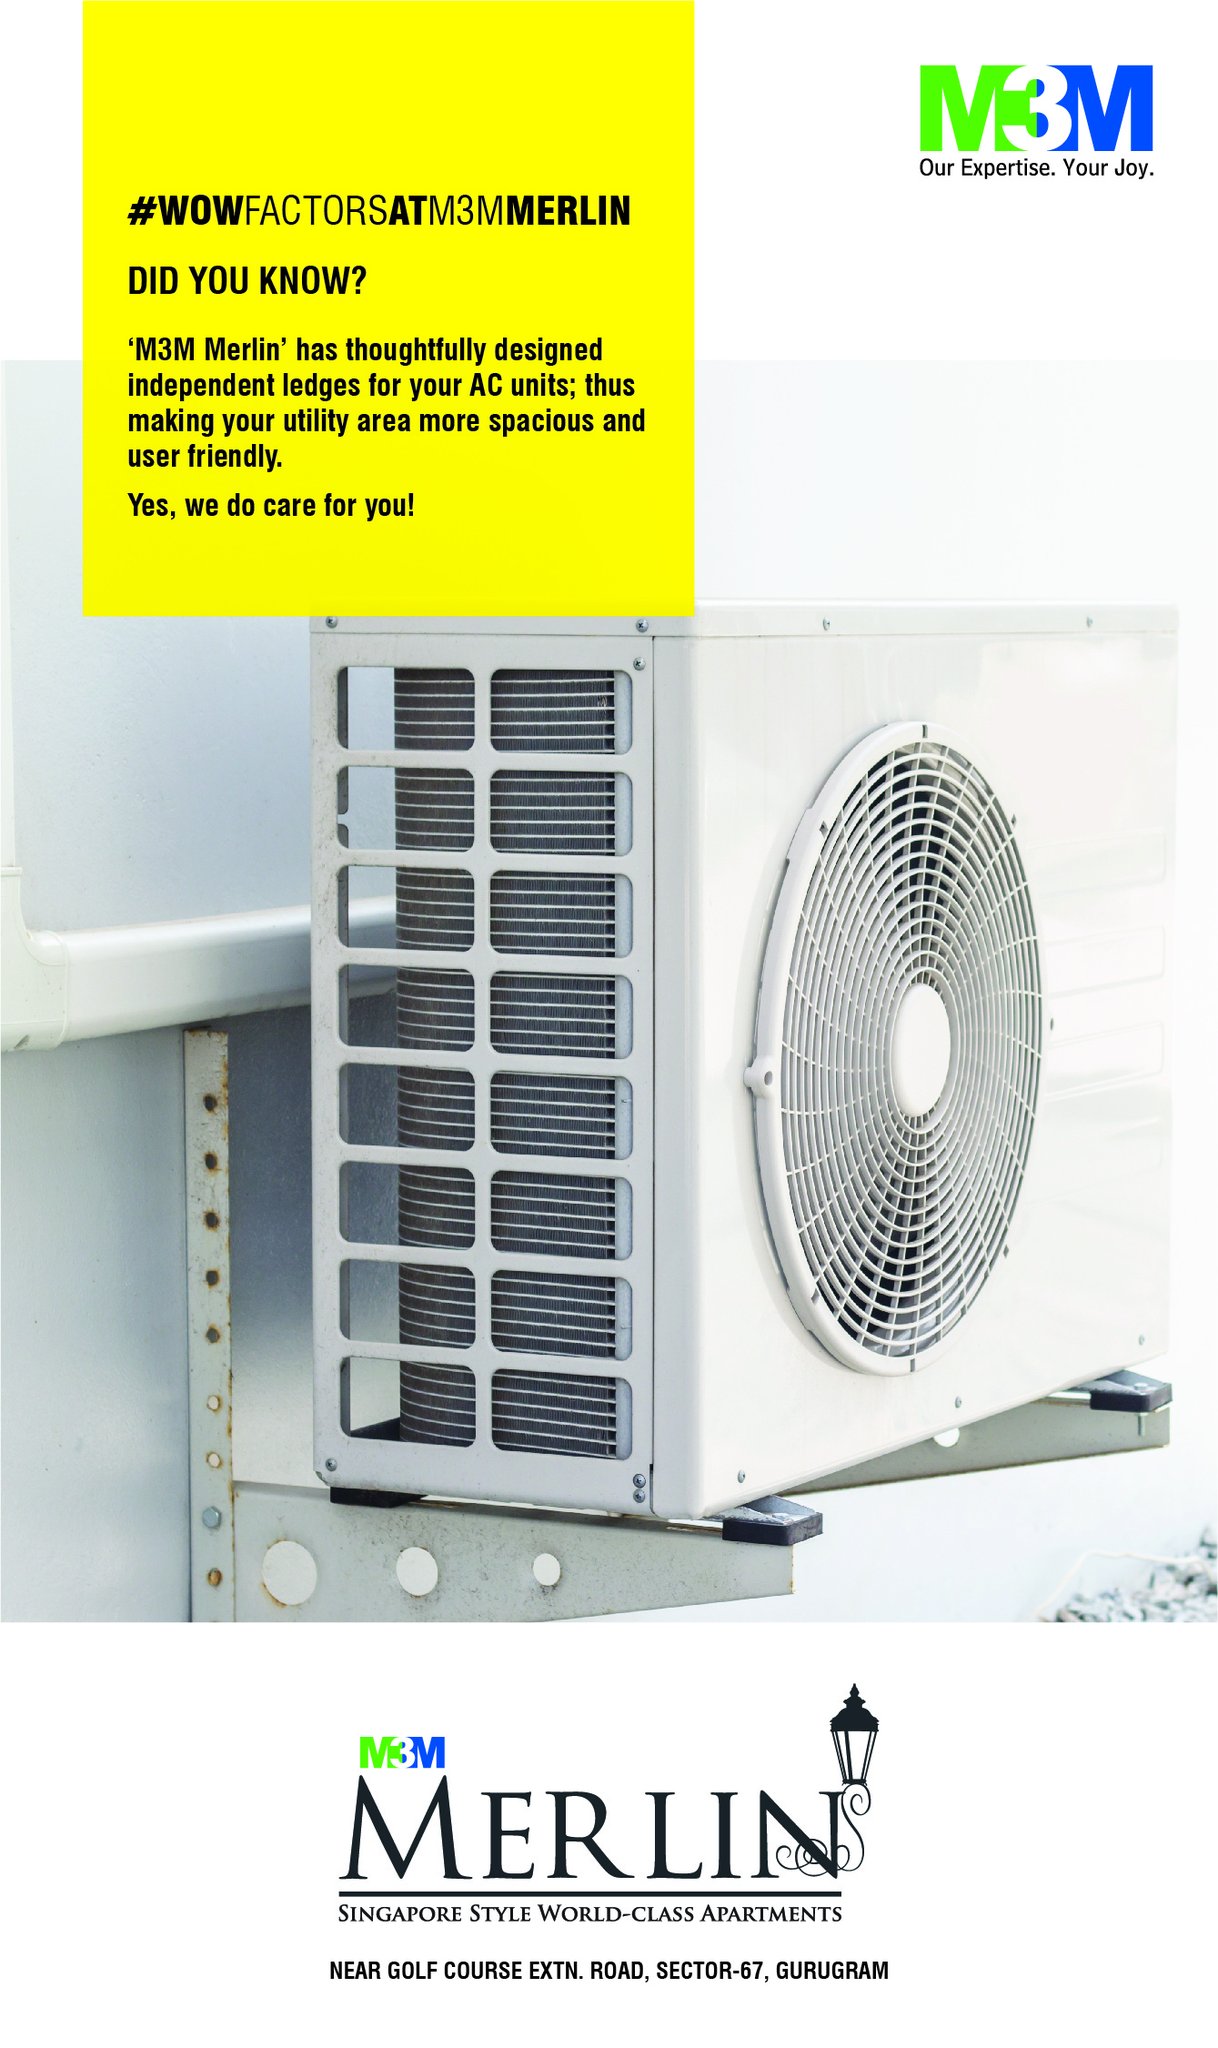 Designed Independent ledges for your AC units at M3M Merlin